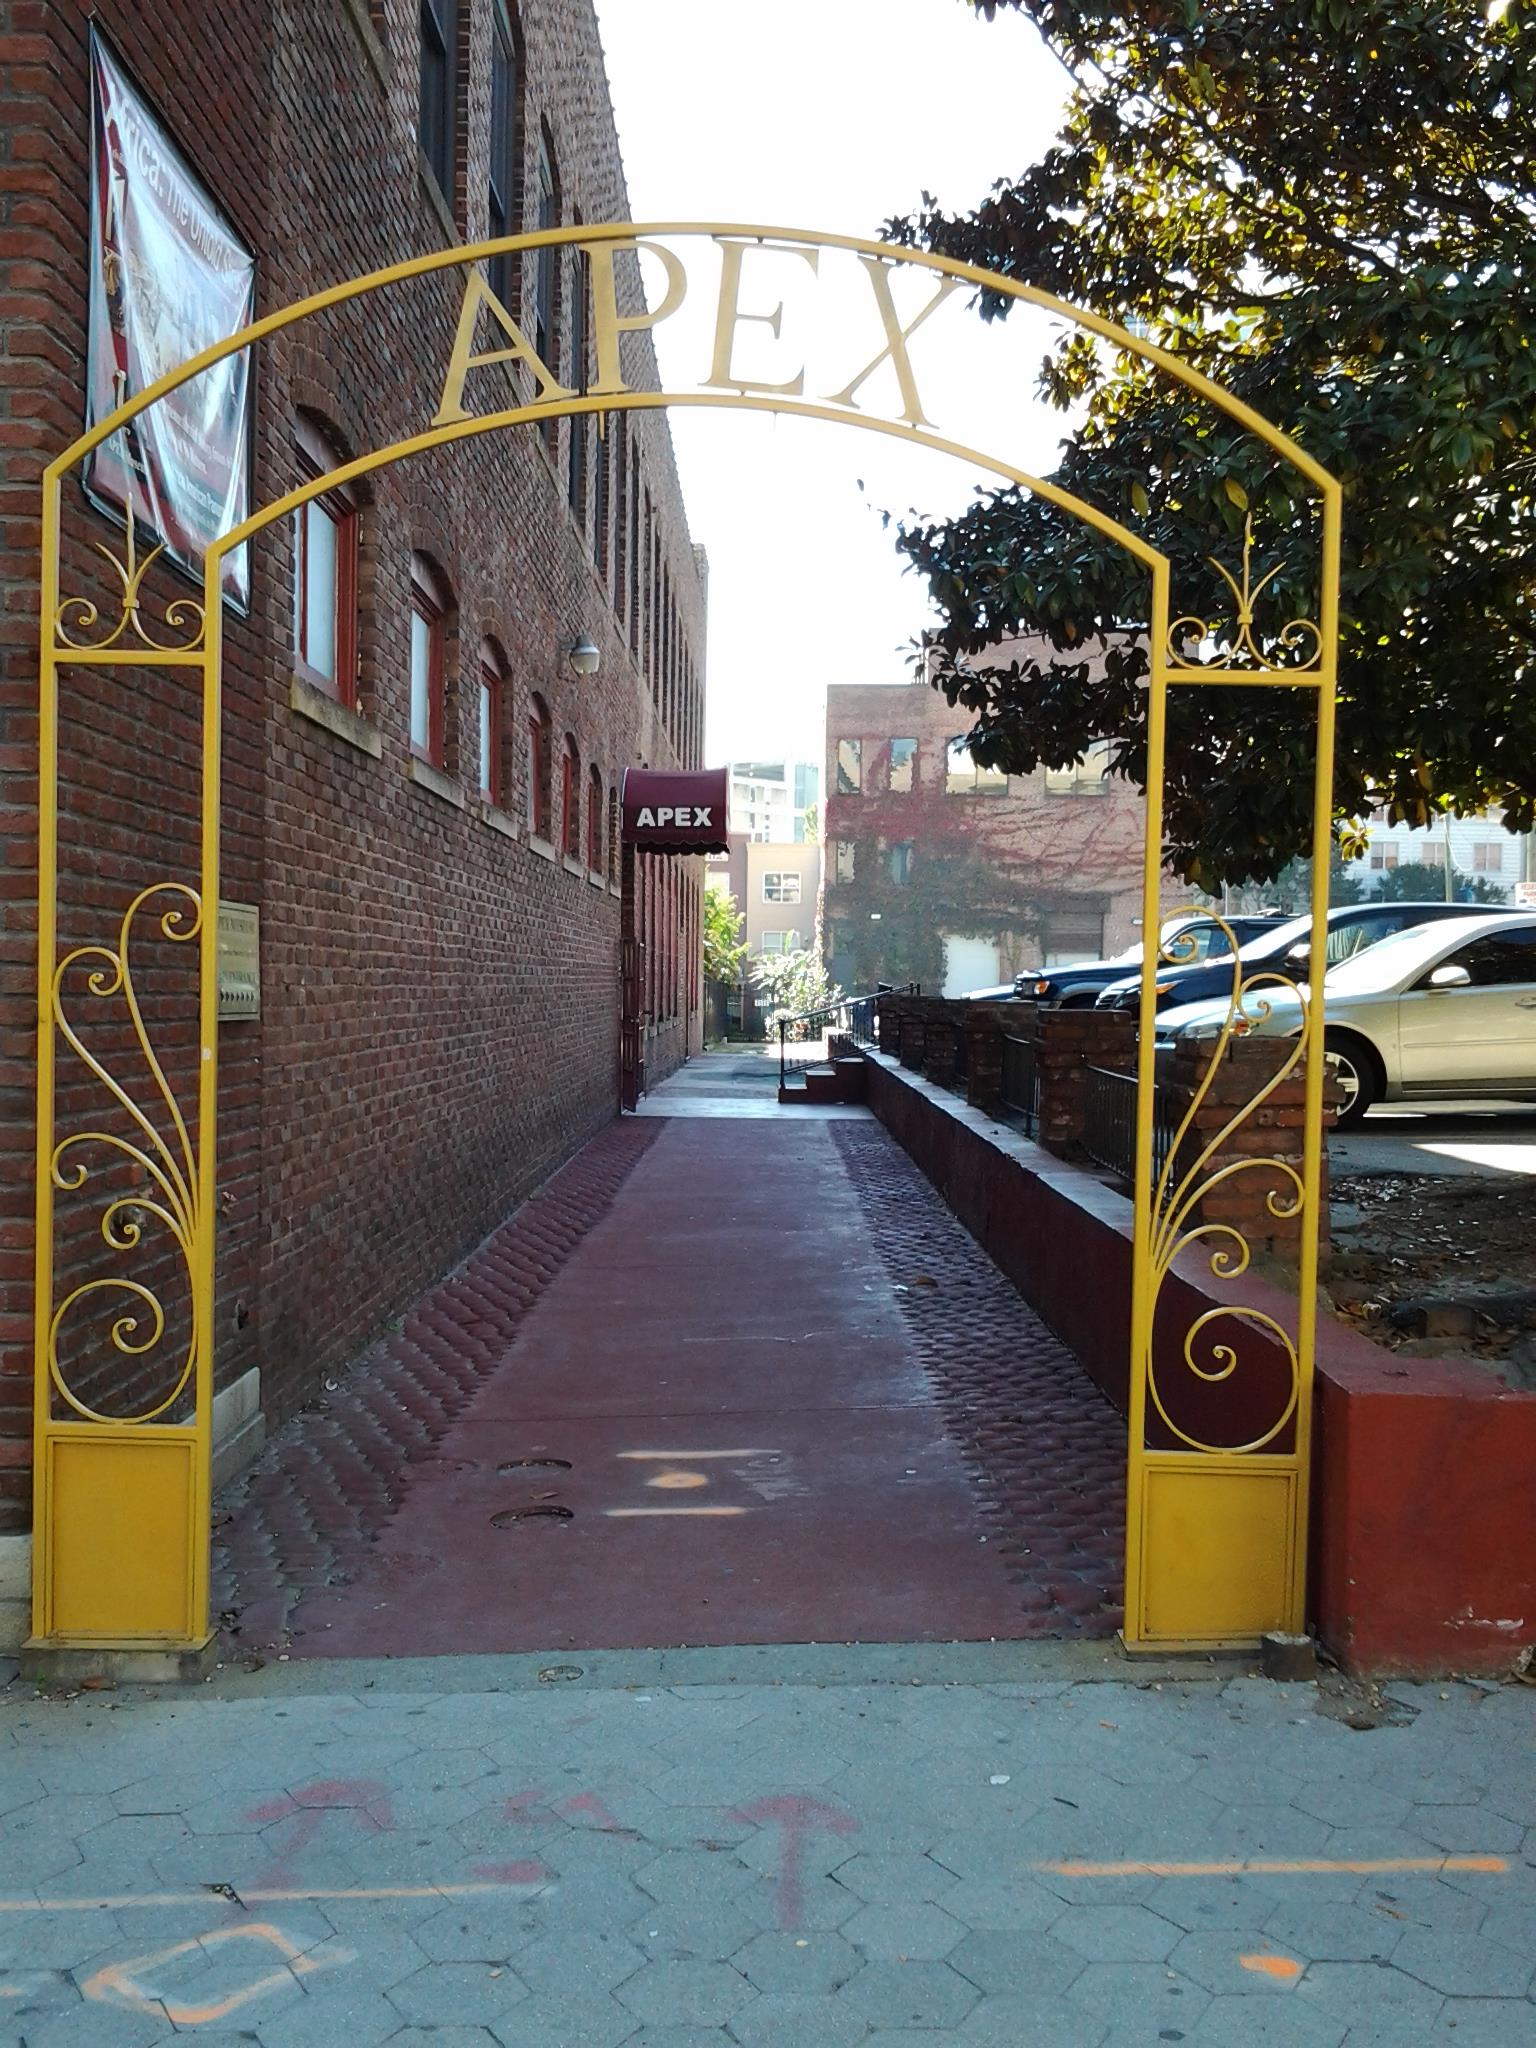 The yellow gate of the APEX museum